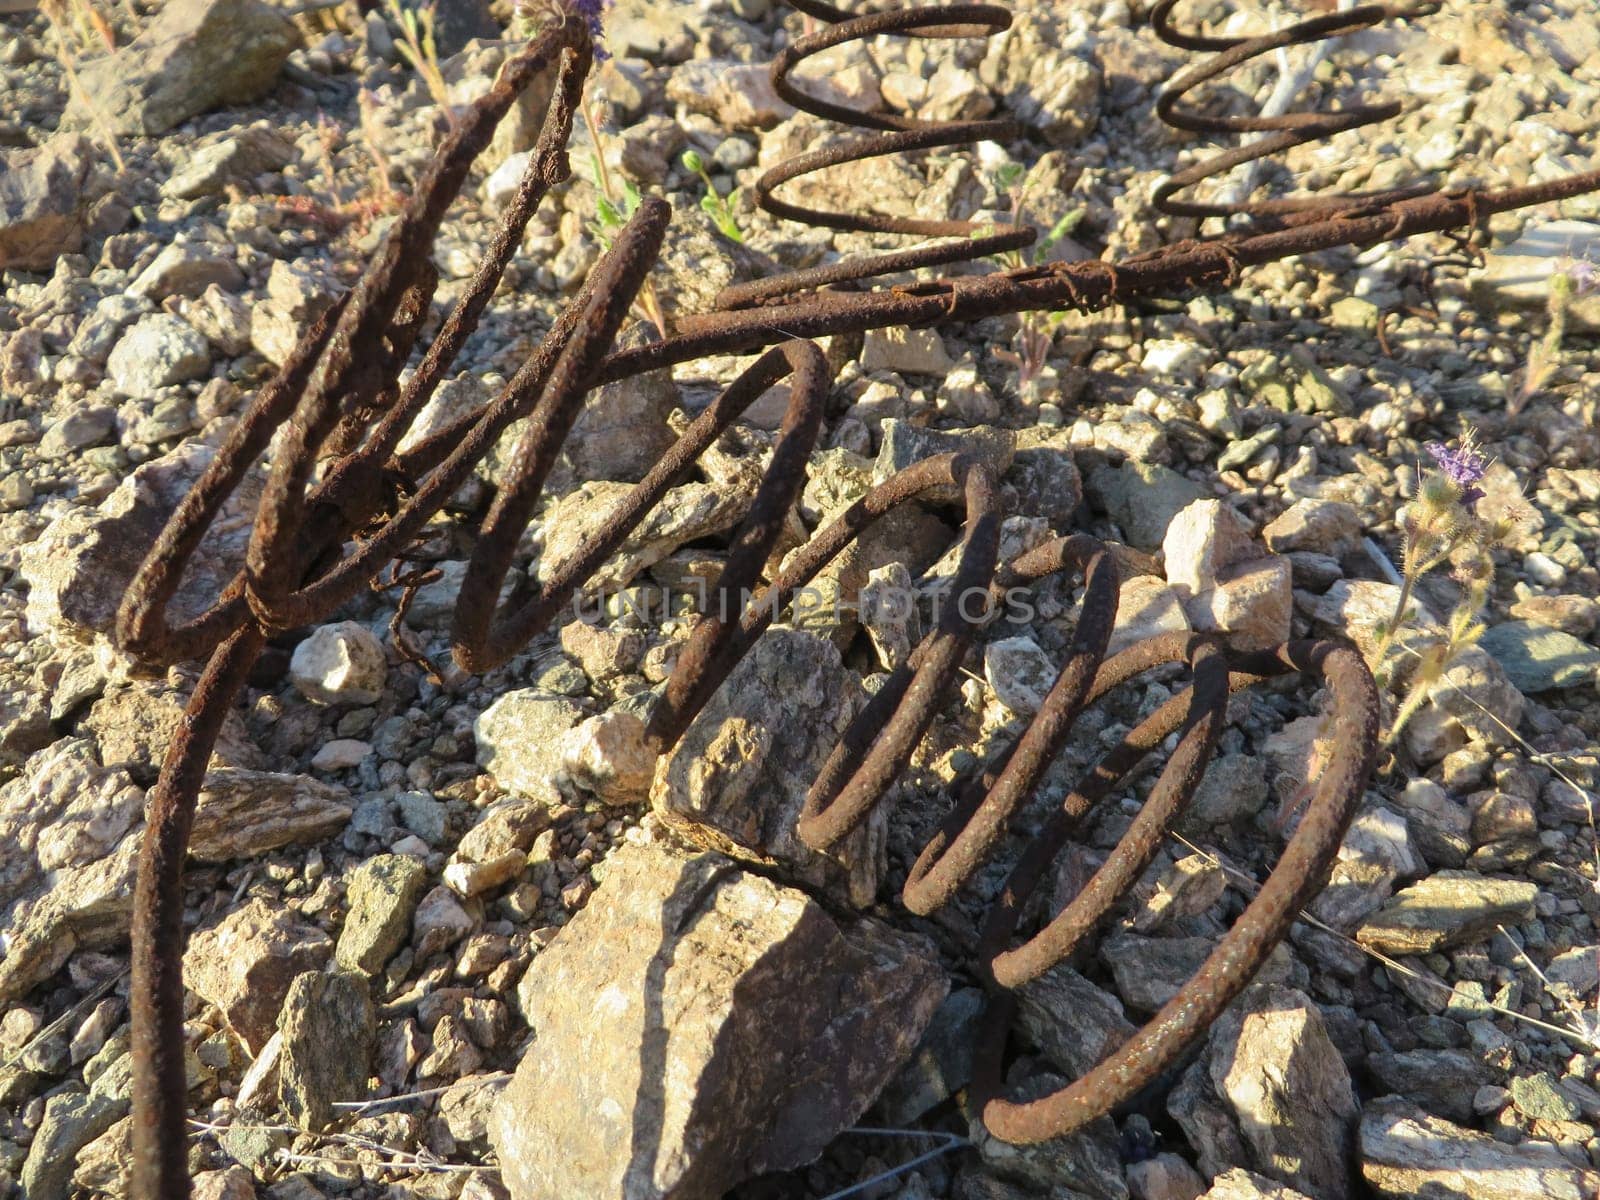 Rusty Old Spring at Abandoned Mine Site in Arizona Desert. High quality photo